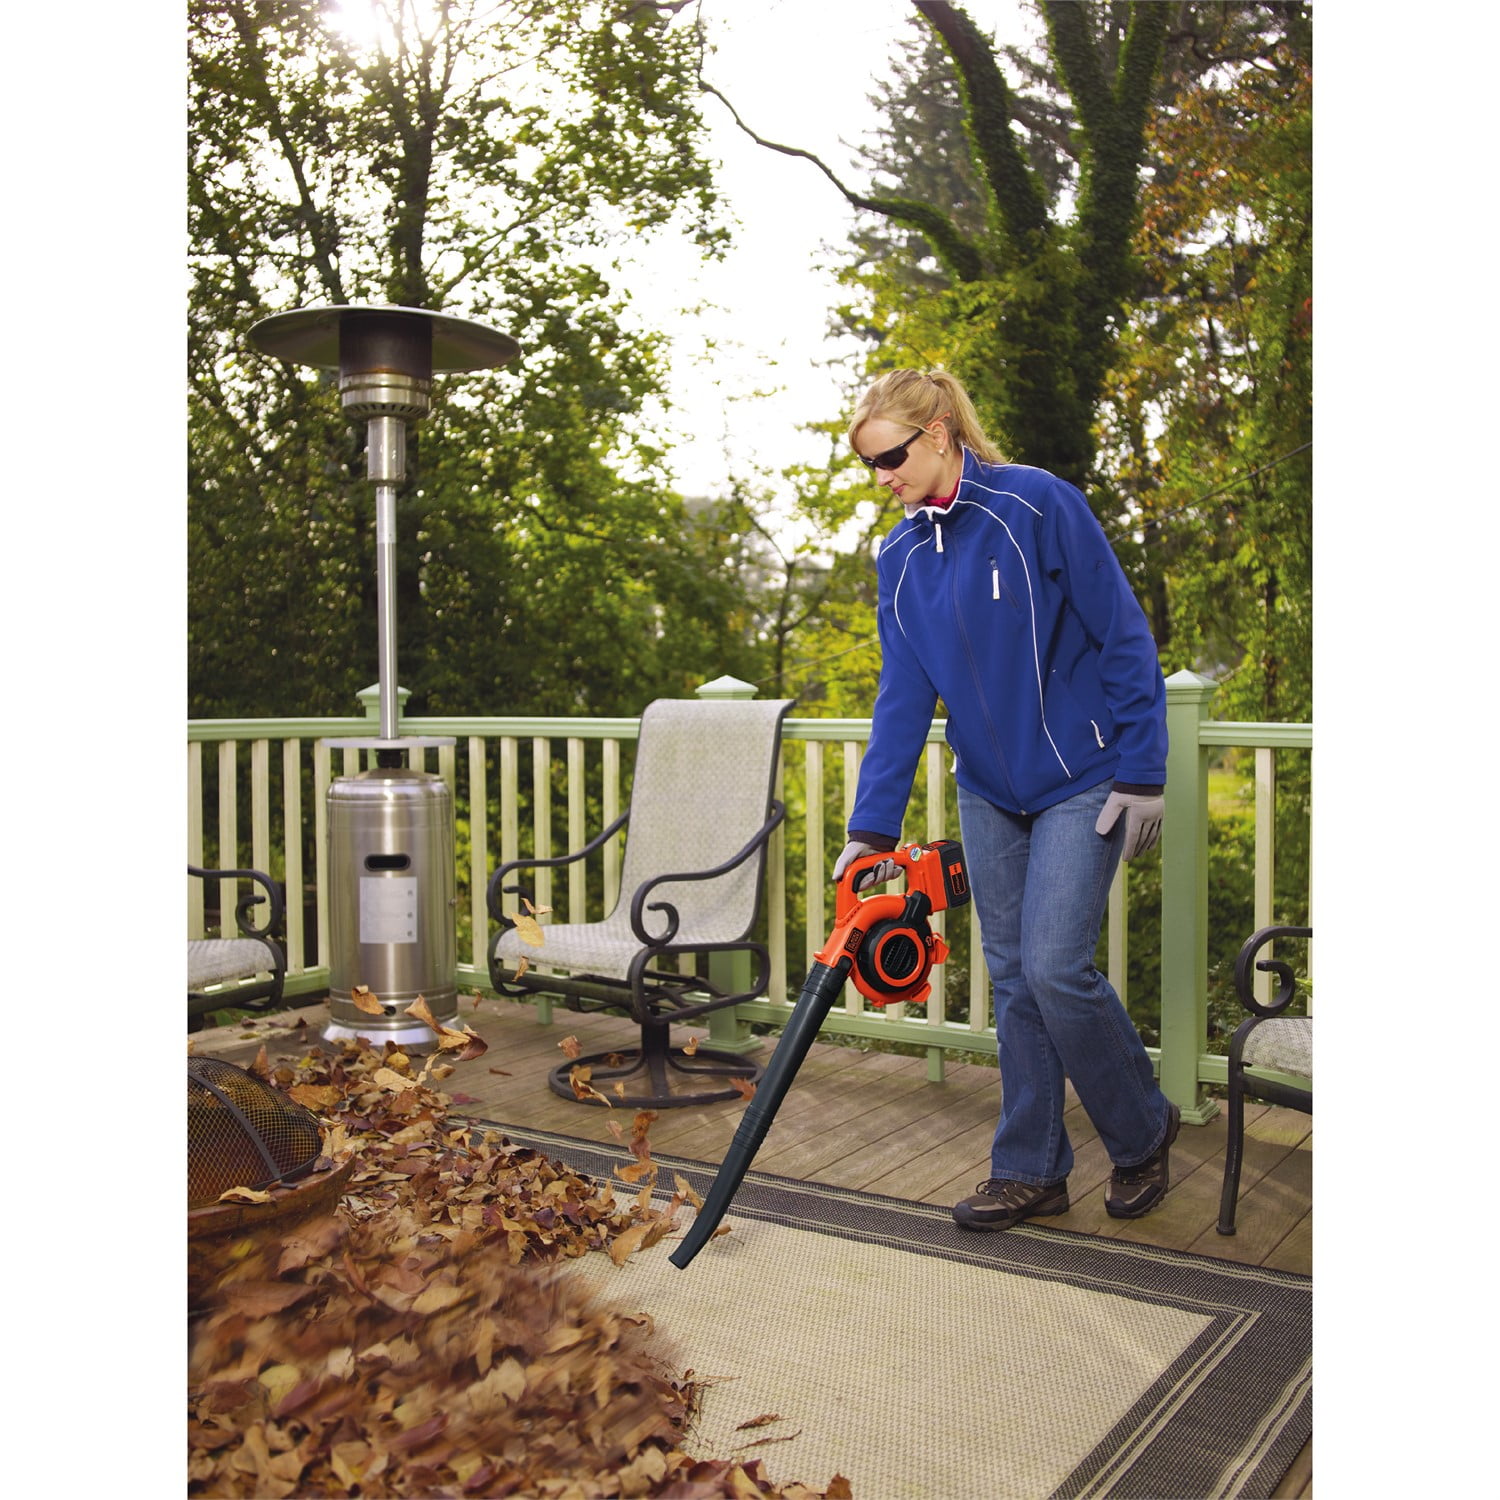 Black+Decker 3-in-1 Leaf Blower & Vacuum Only $79 Shipped on